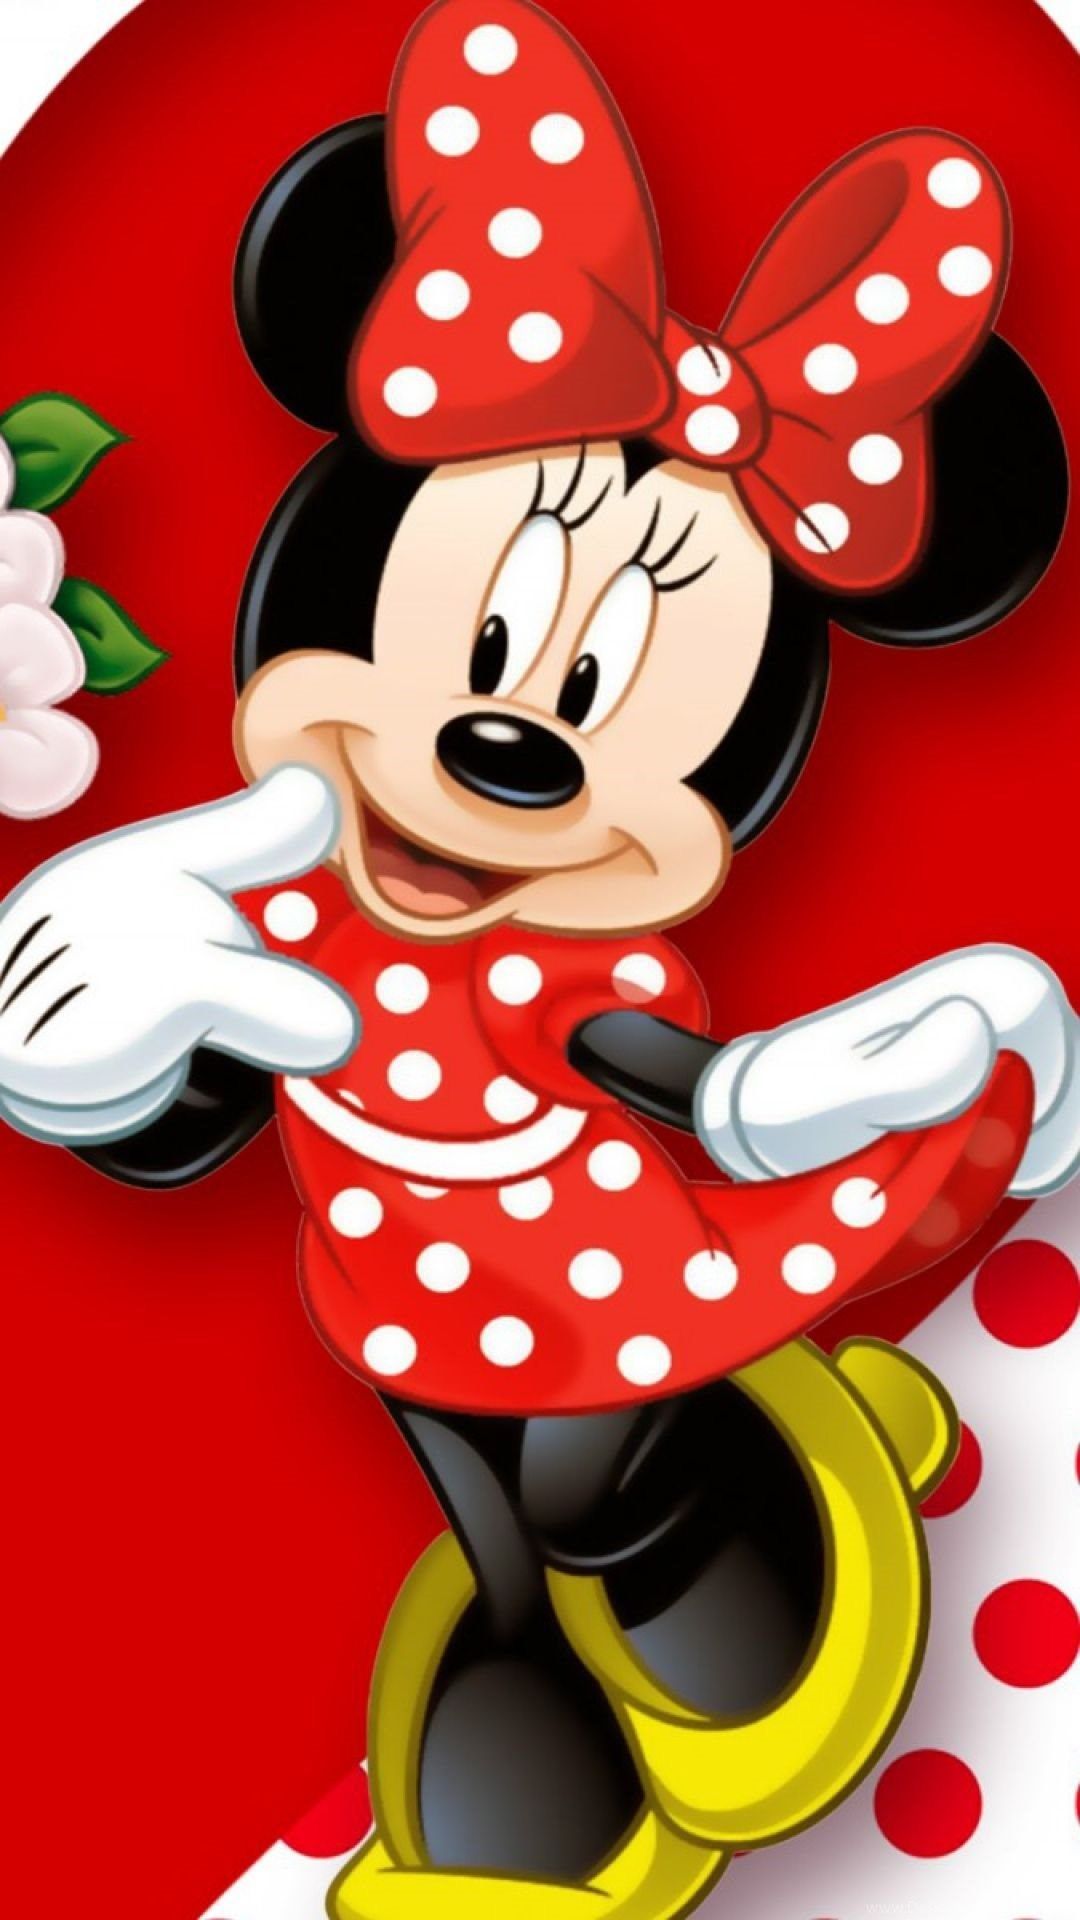 Mickey Mouse Wallpaper, Mickey Mouse Wallpaper iPhone, Mickey Mouse Art.